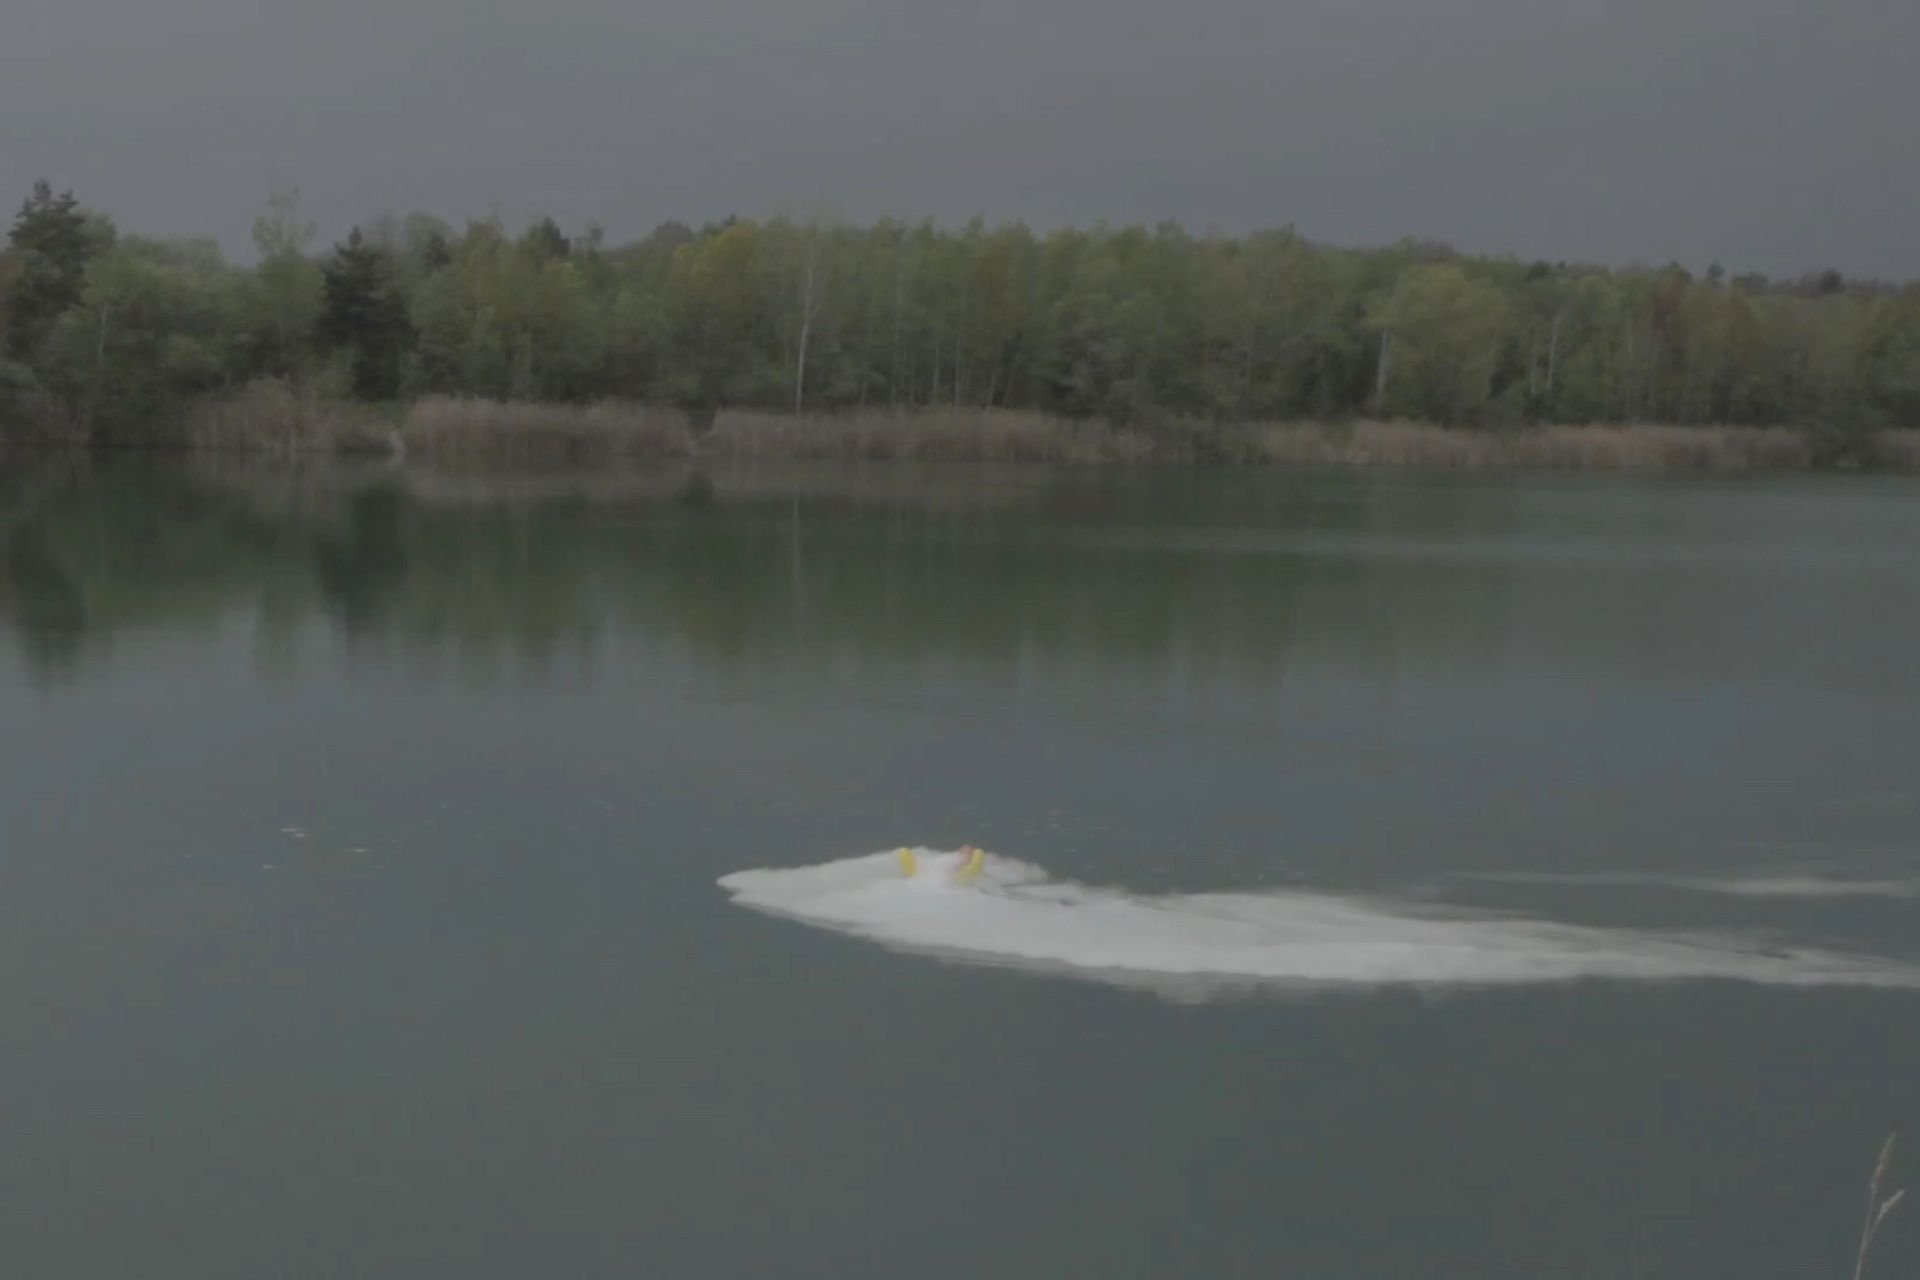 Film still of dancing pizza on lake for PPKK 01.00 by Sarah Ancelle Schoenfeld and Louis-Philippe Scoufaras in Pomssen